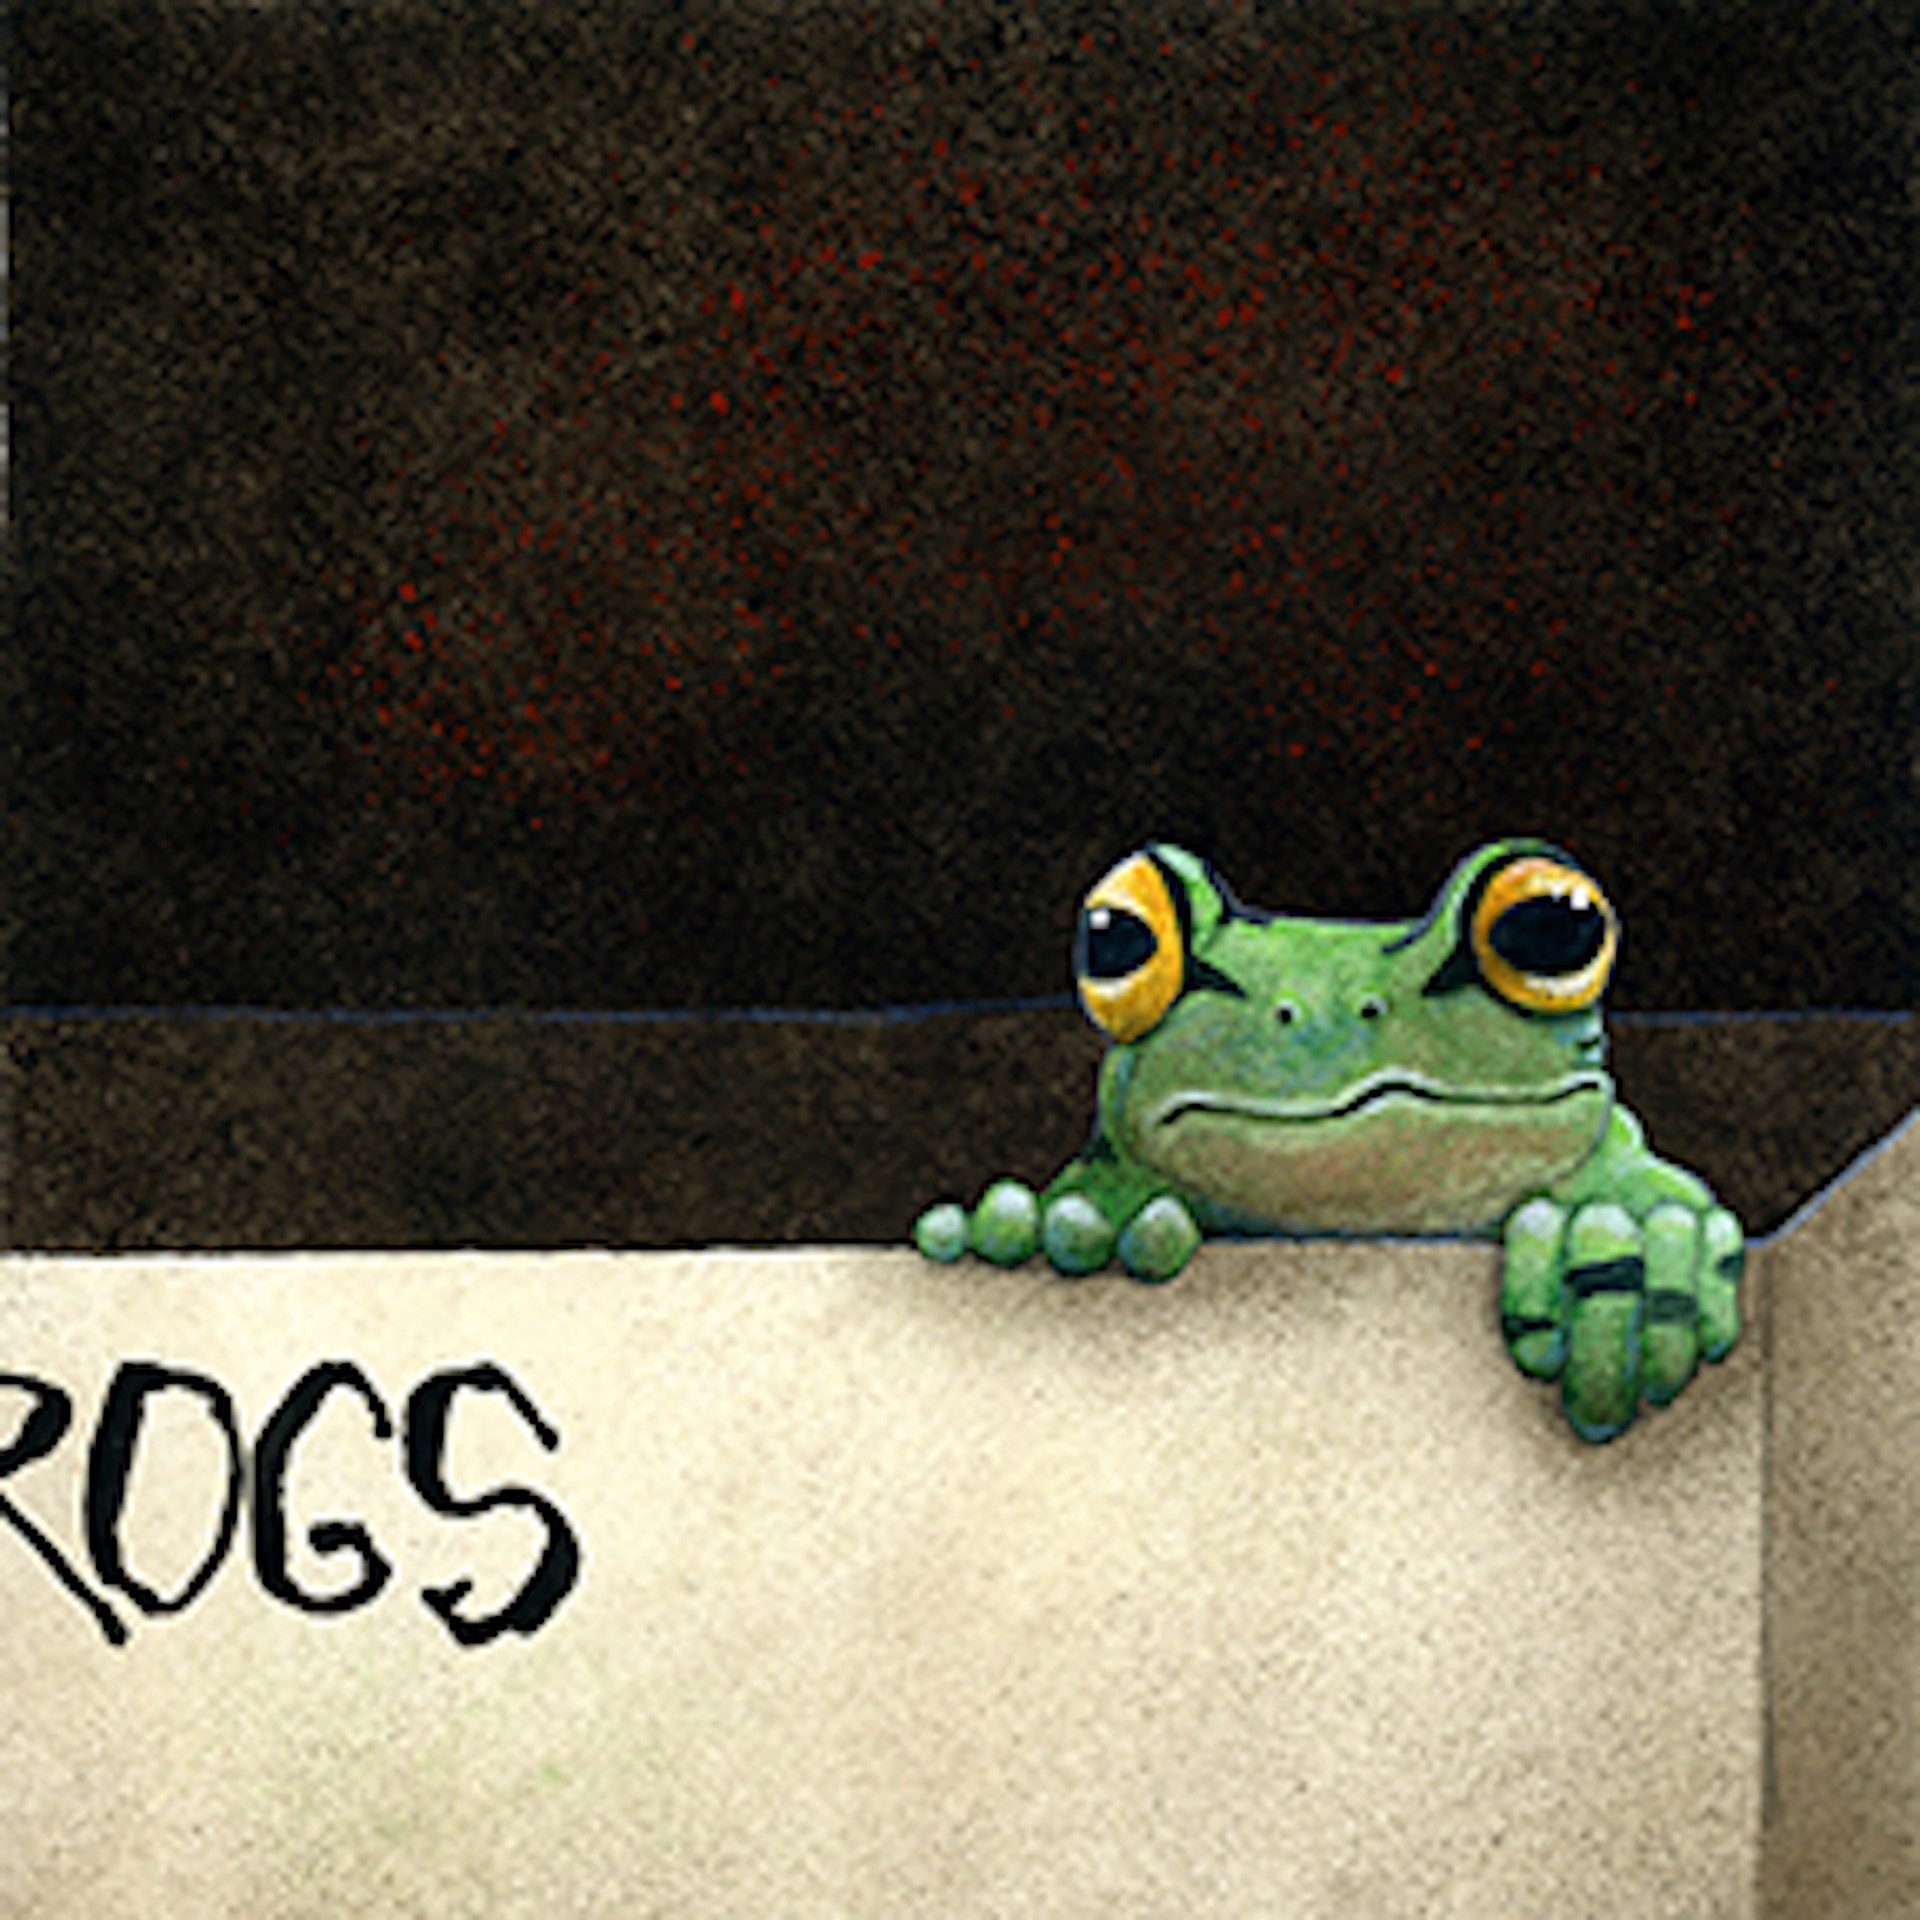 Box of Frogs by Will Bullas